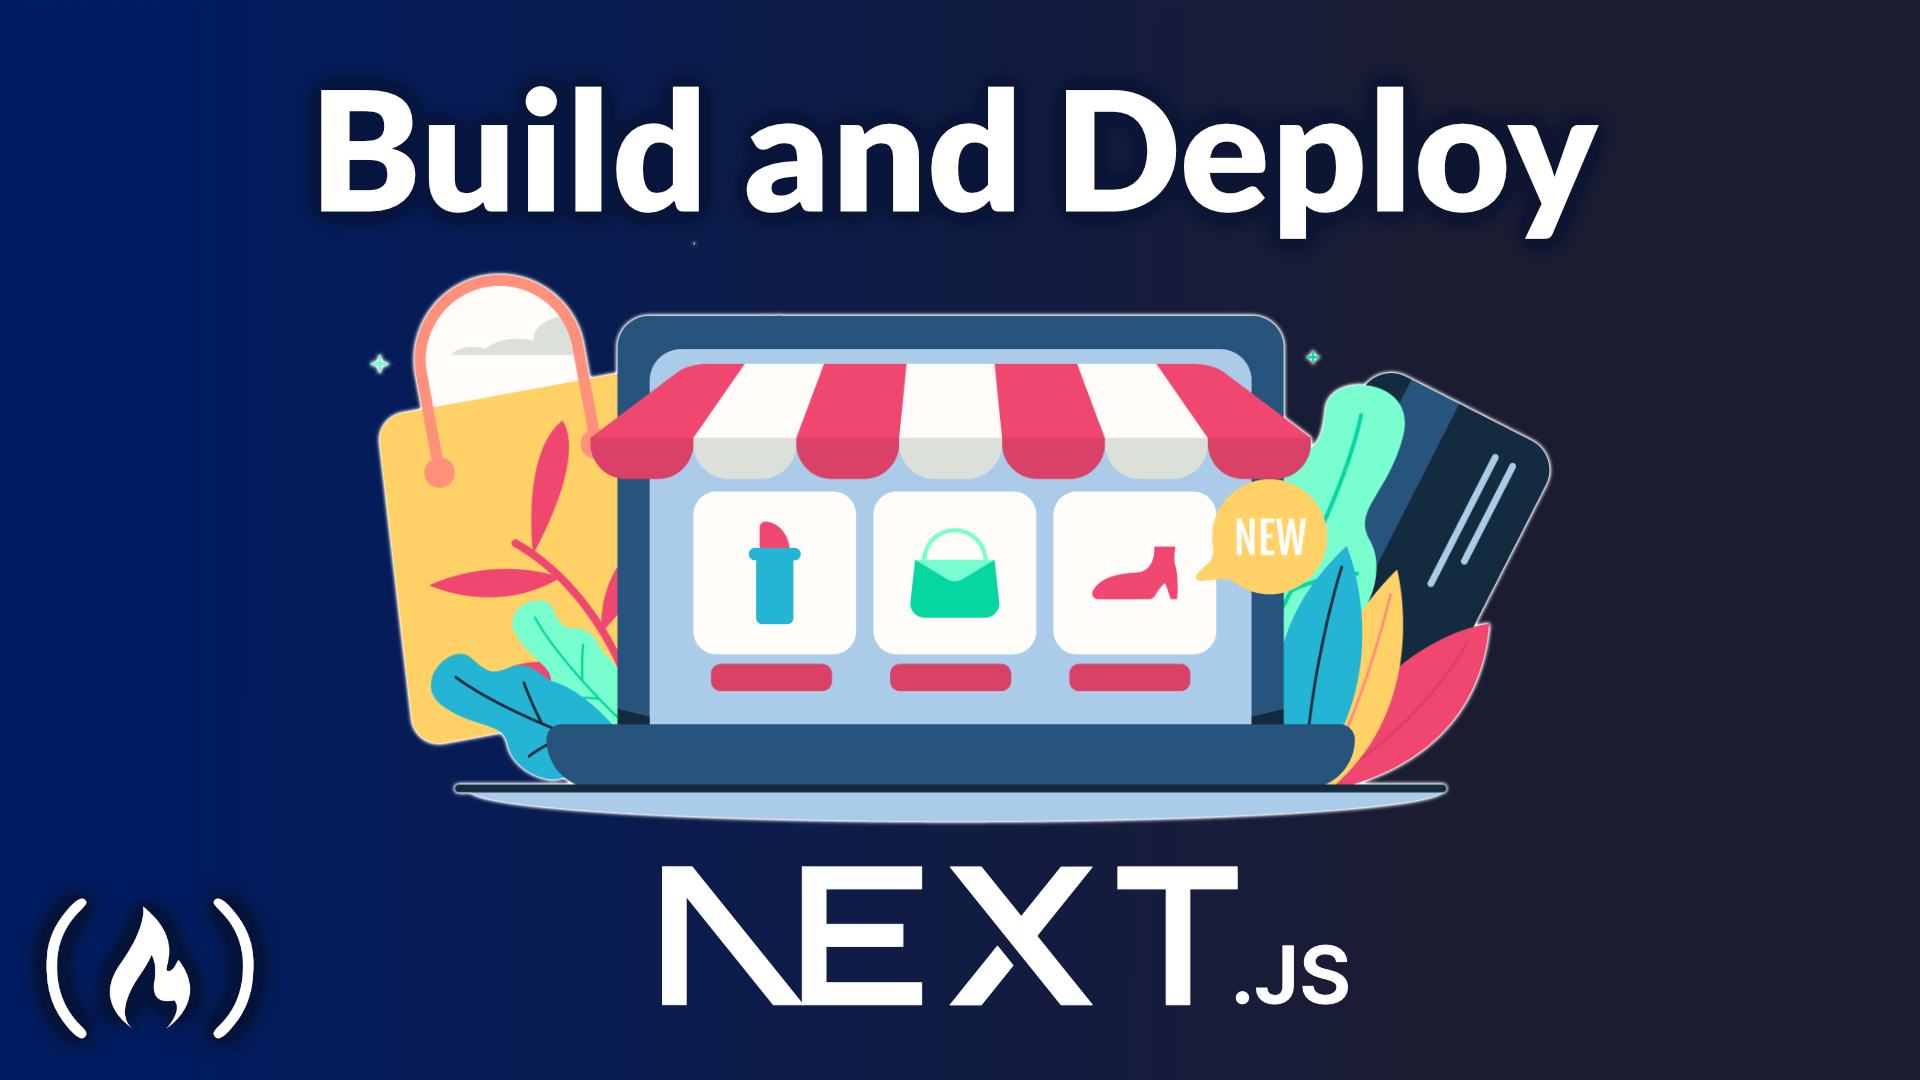 Image for Build and Deploy an Ecommerce Site with Next.js, Tailwind CSS, Prisma, Vercel, and daisyUI